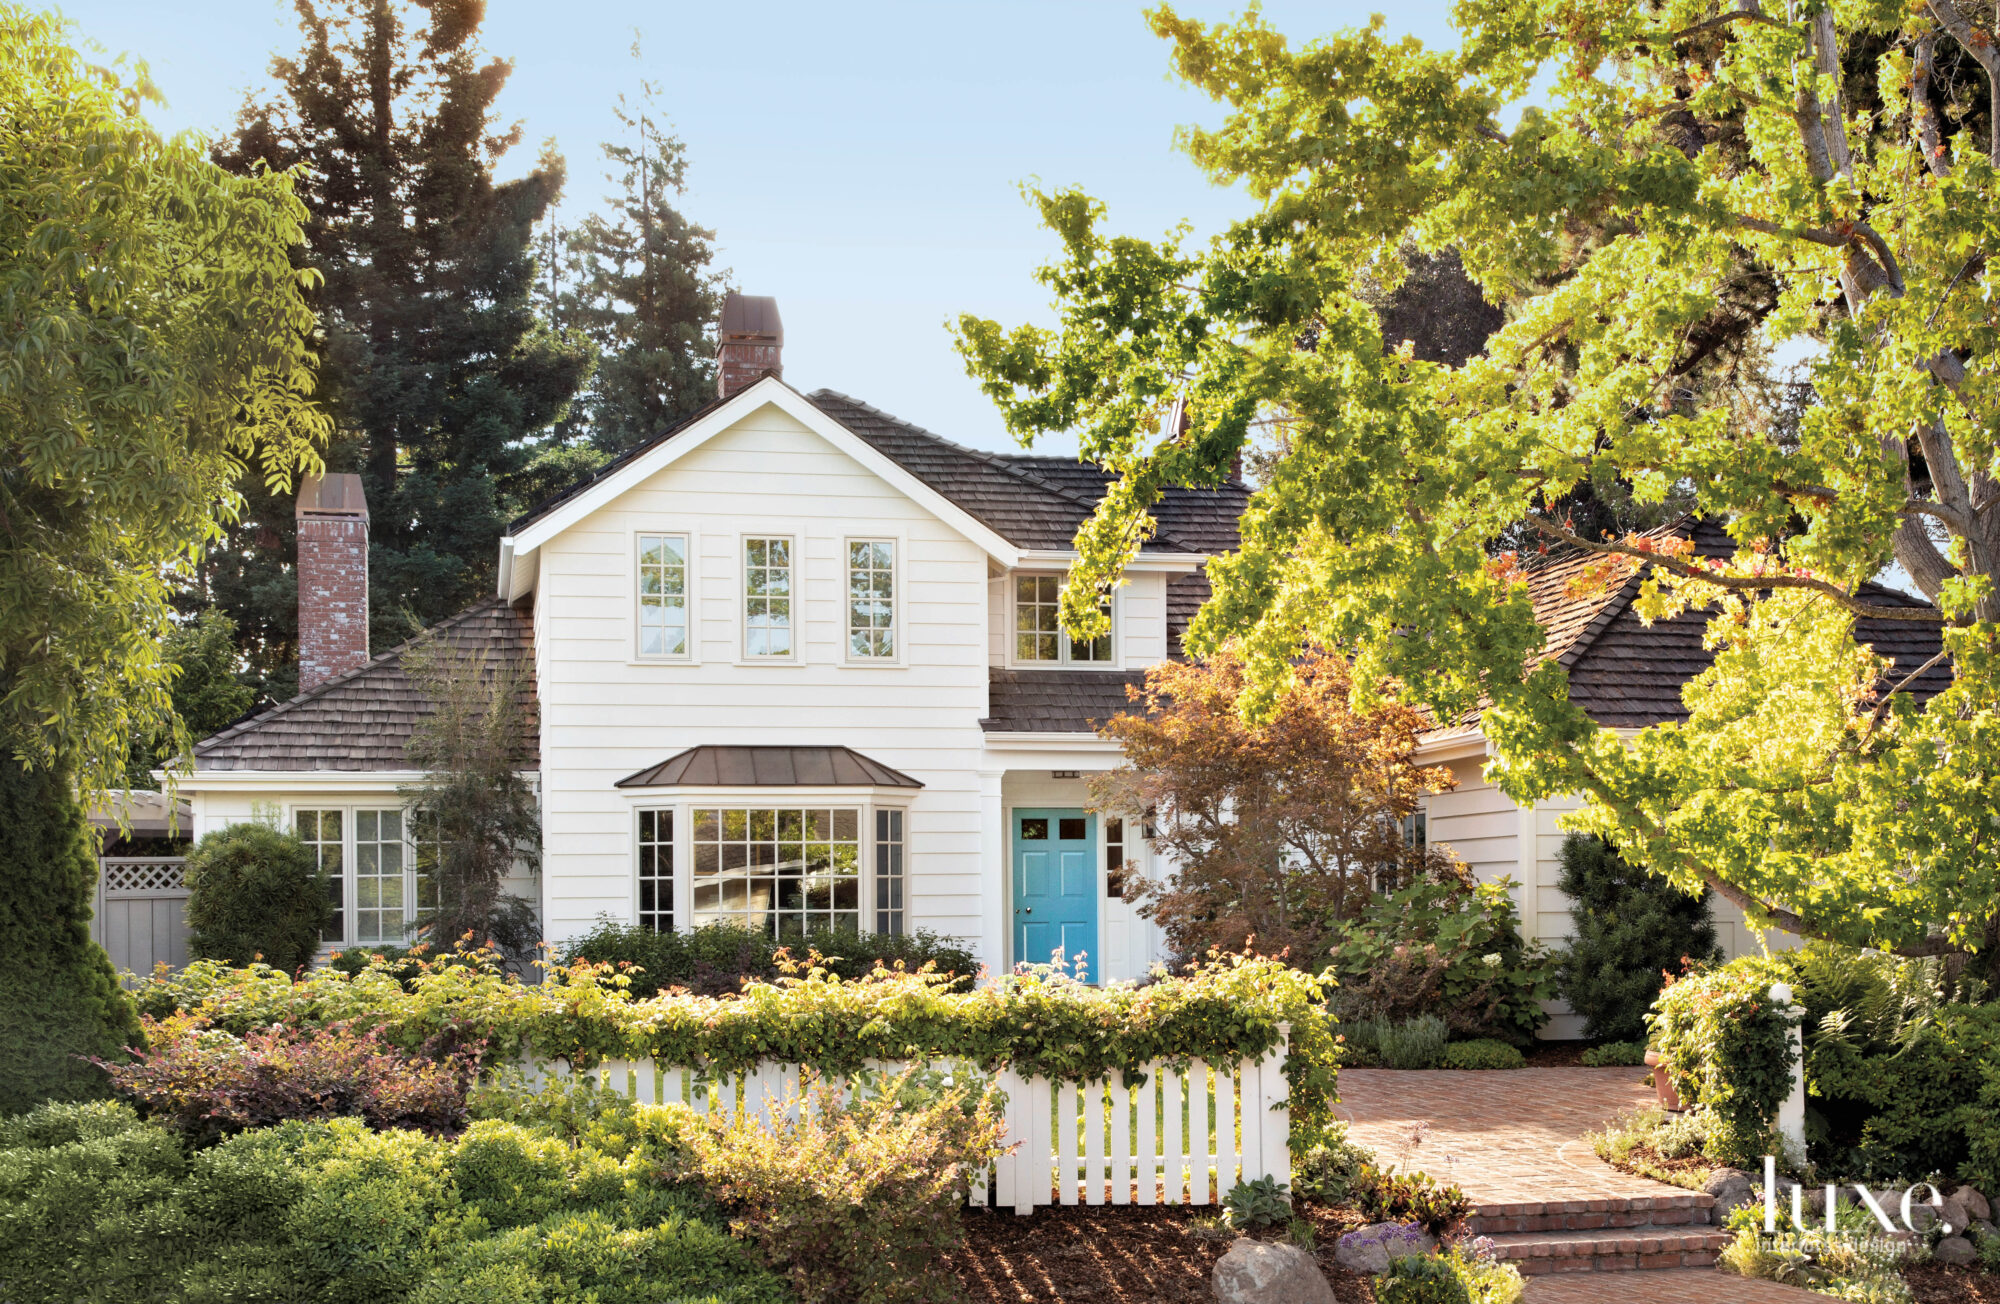 The exterior of the home is white with a blue door. It's surrounded by a lush, green garden.